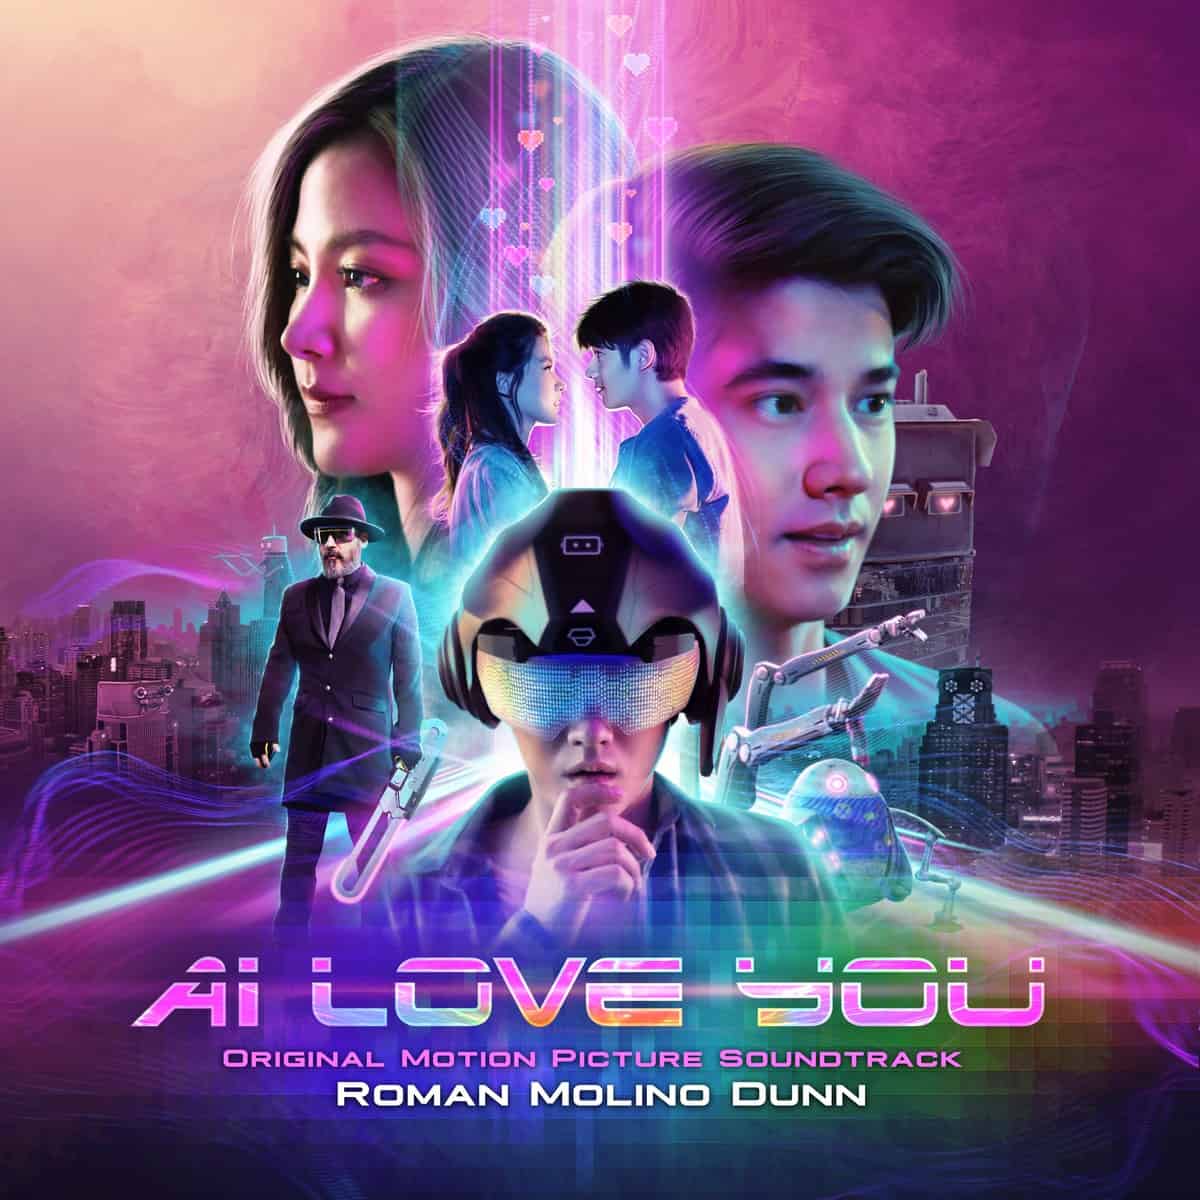 Poster for AI Love You - Neon flavored heads behind someone in a VR headset